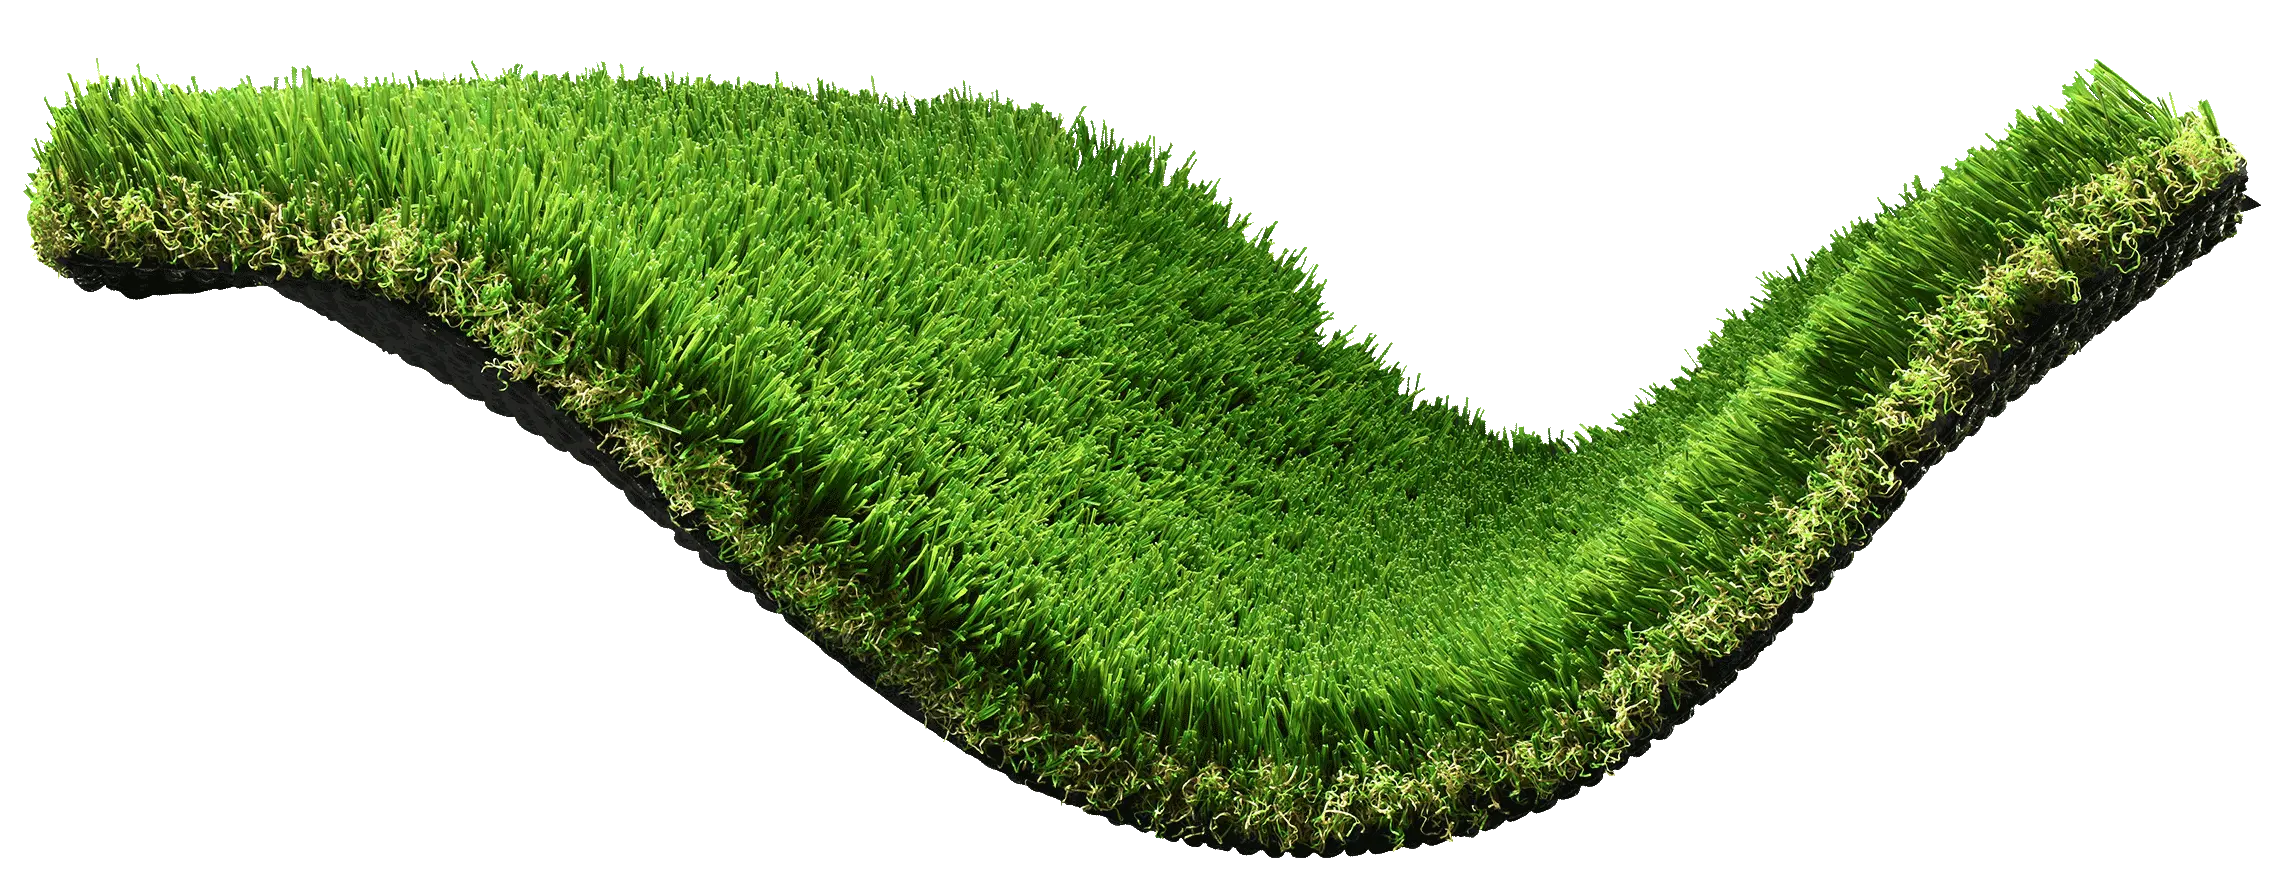 Ecoshield Turf sample square curved for design